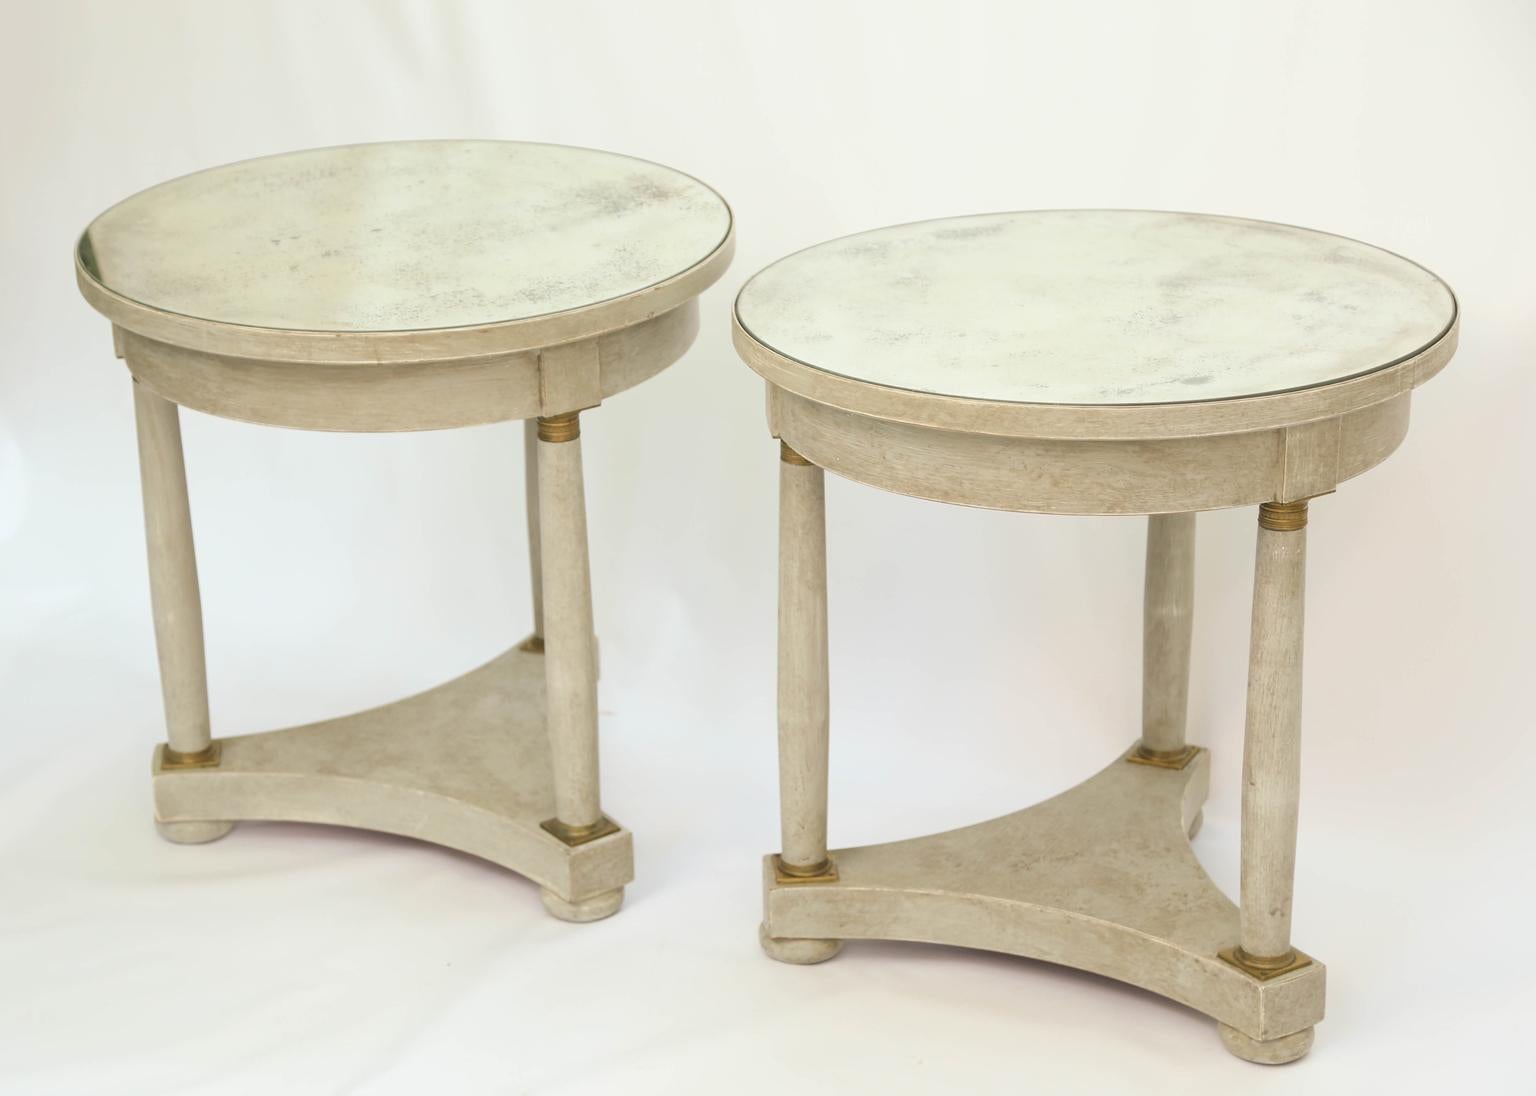 Brass Pair of Empire Form Painted End Tables with Mirrored Tops